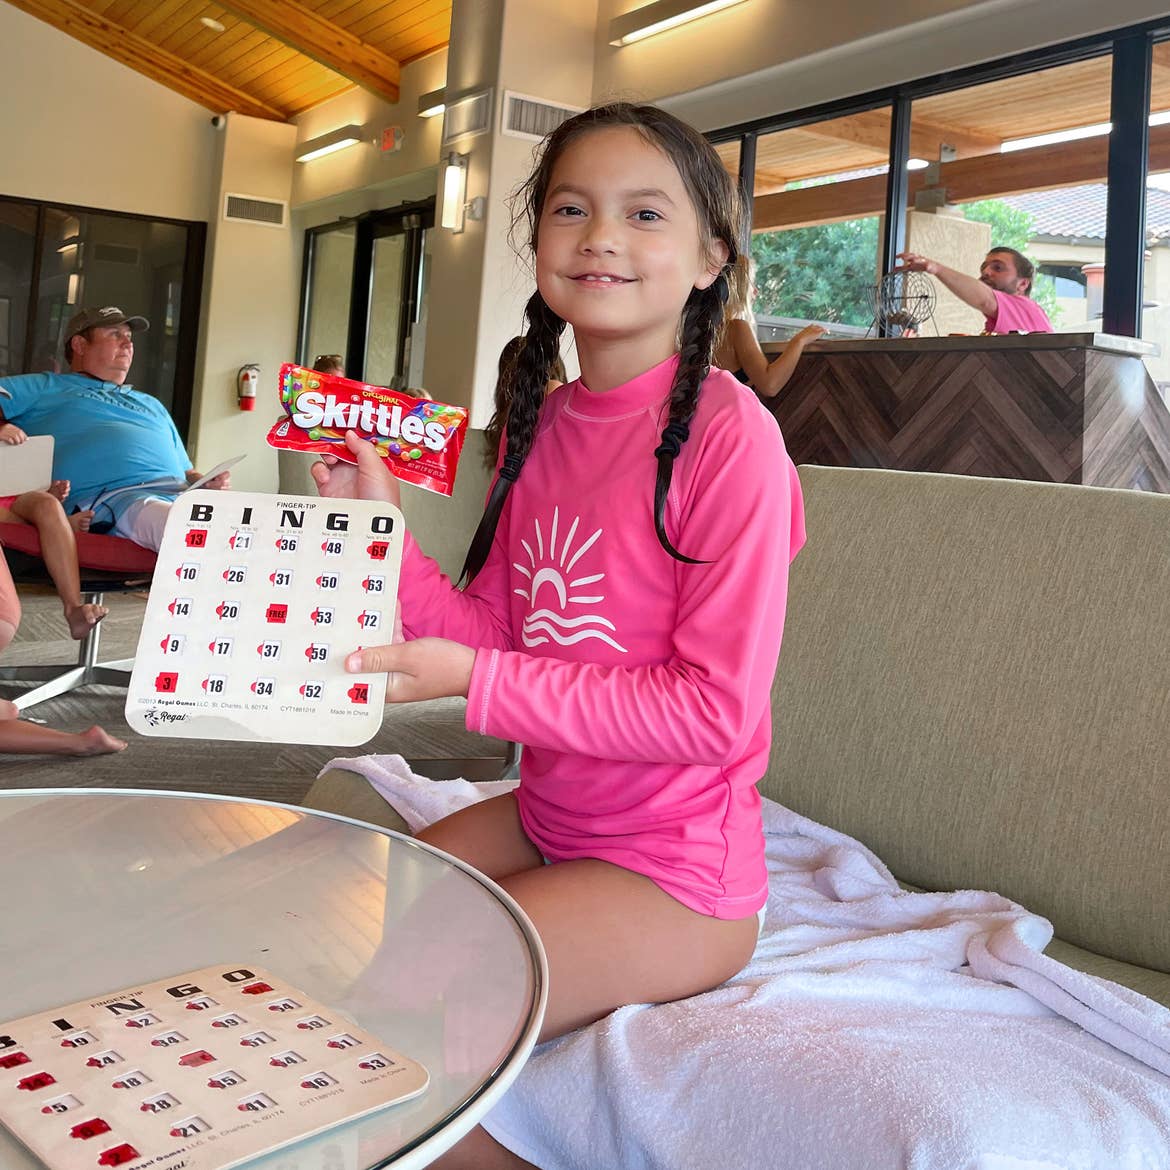 A young girl in a pink rashguard suit holds a complete bingo card and a candy bar while seated near a table.